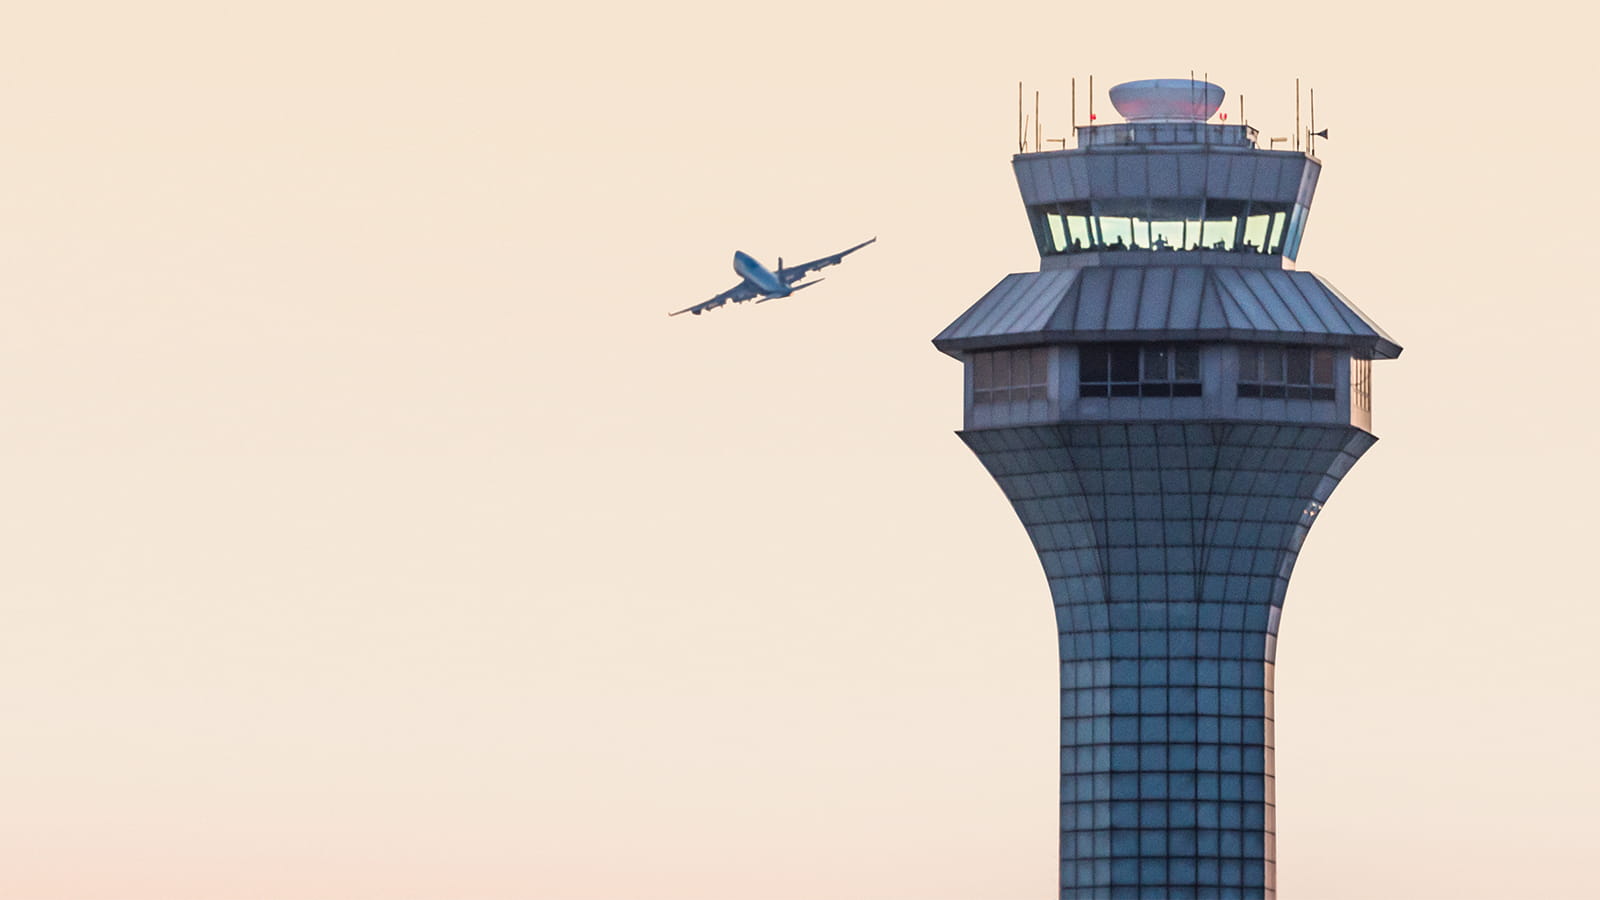 Airplane flying next to air traffic control tower